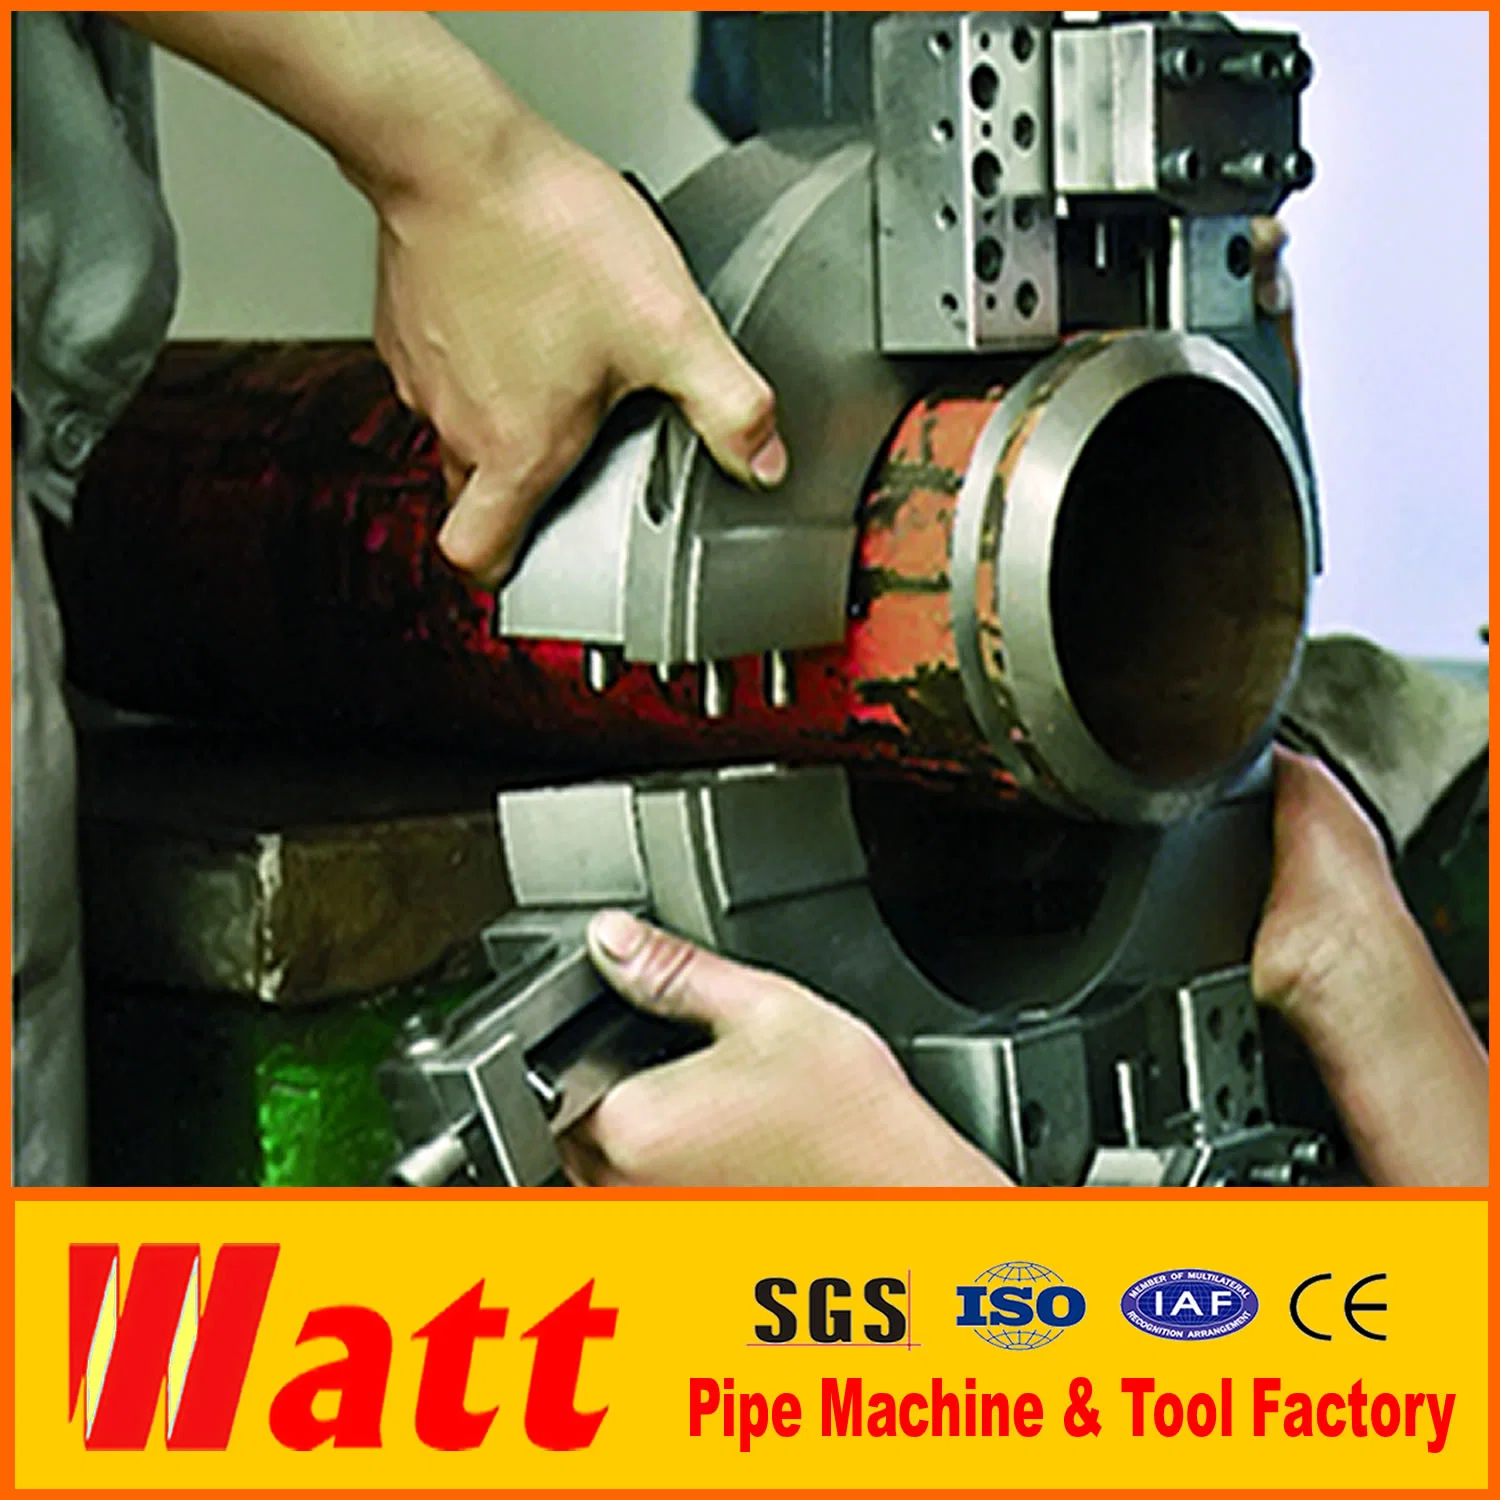 Split Frame Pipe Cutting and Beveling Machine Cold Tube Cutter